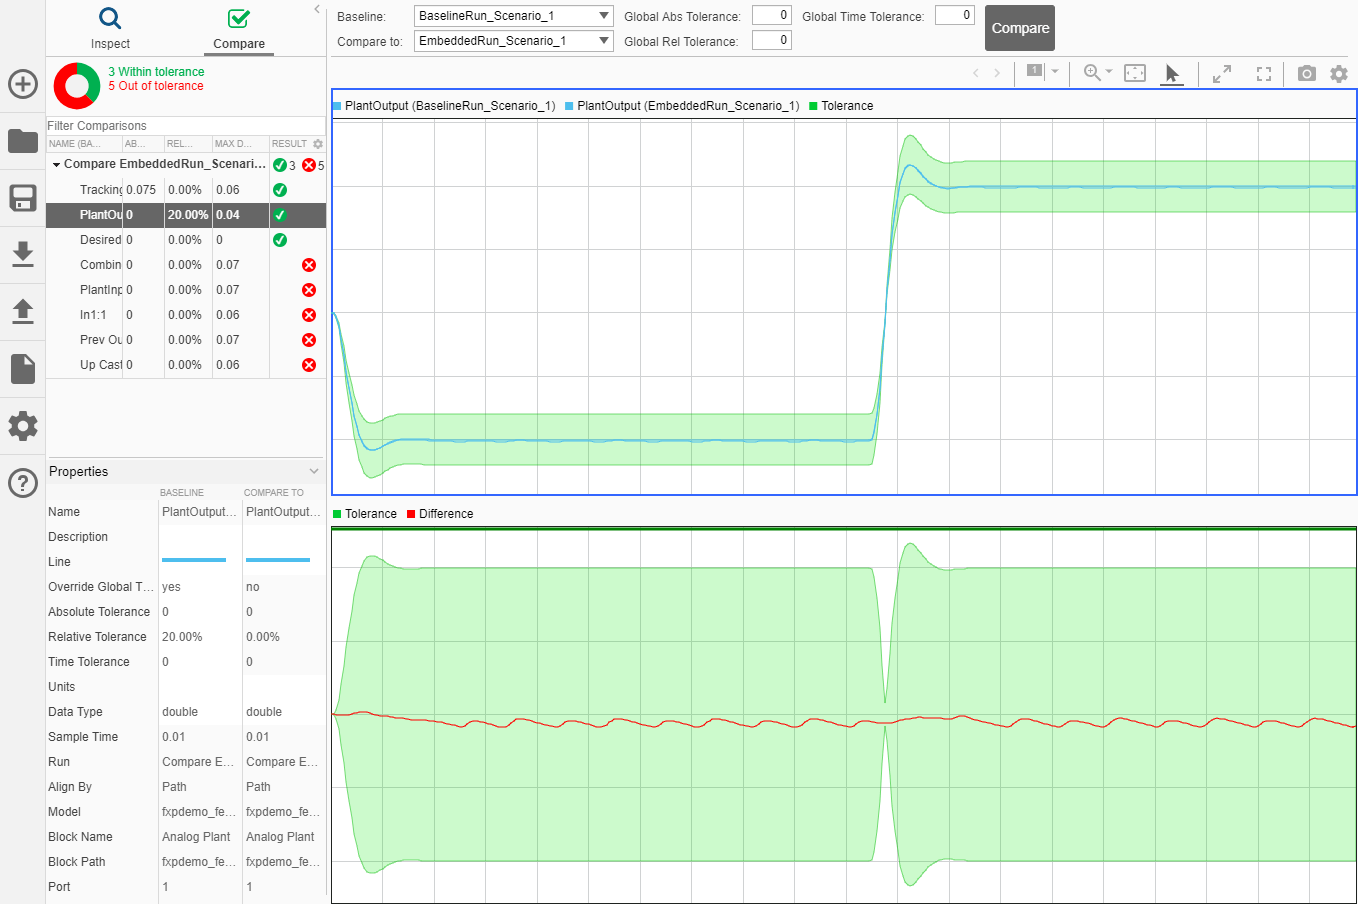 View of the Simulation Data Inspector showing the comparison between BaselineRun and EmbeddedRun for logged signals, including specified tolerance bands.